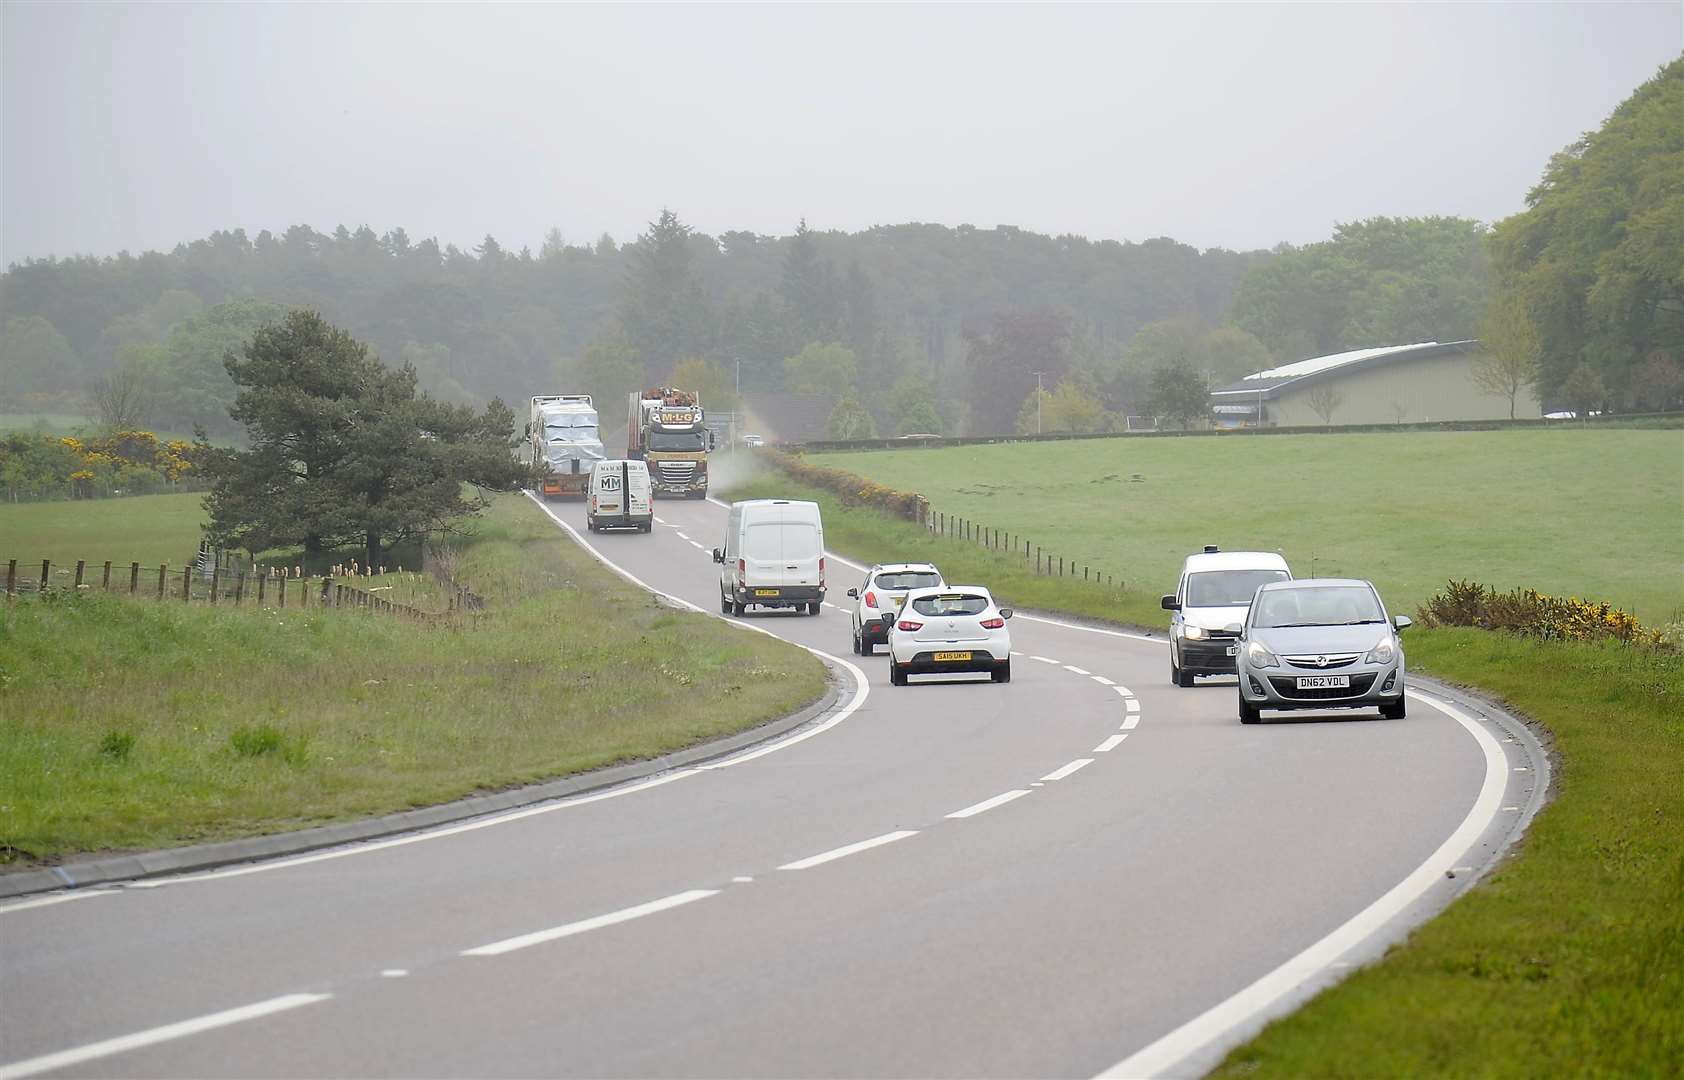 Much of the A96 is not dual carriageway.